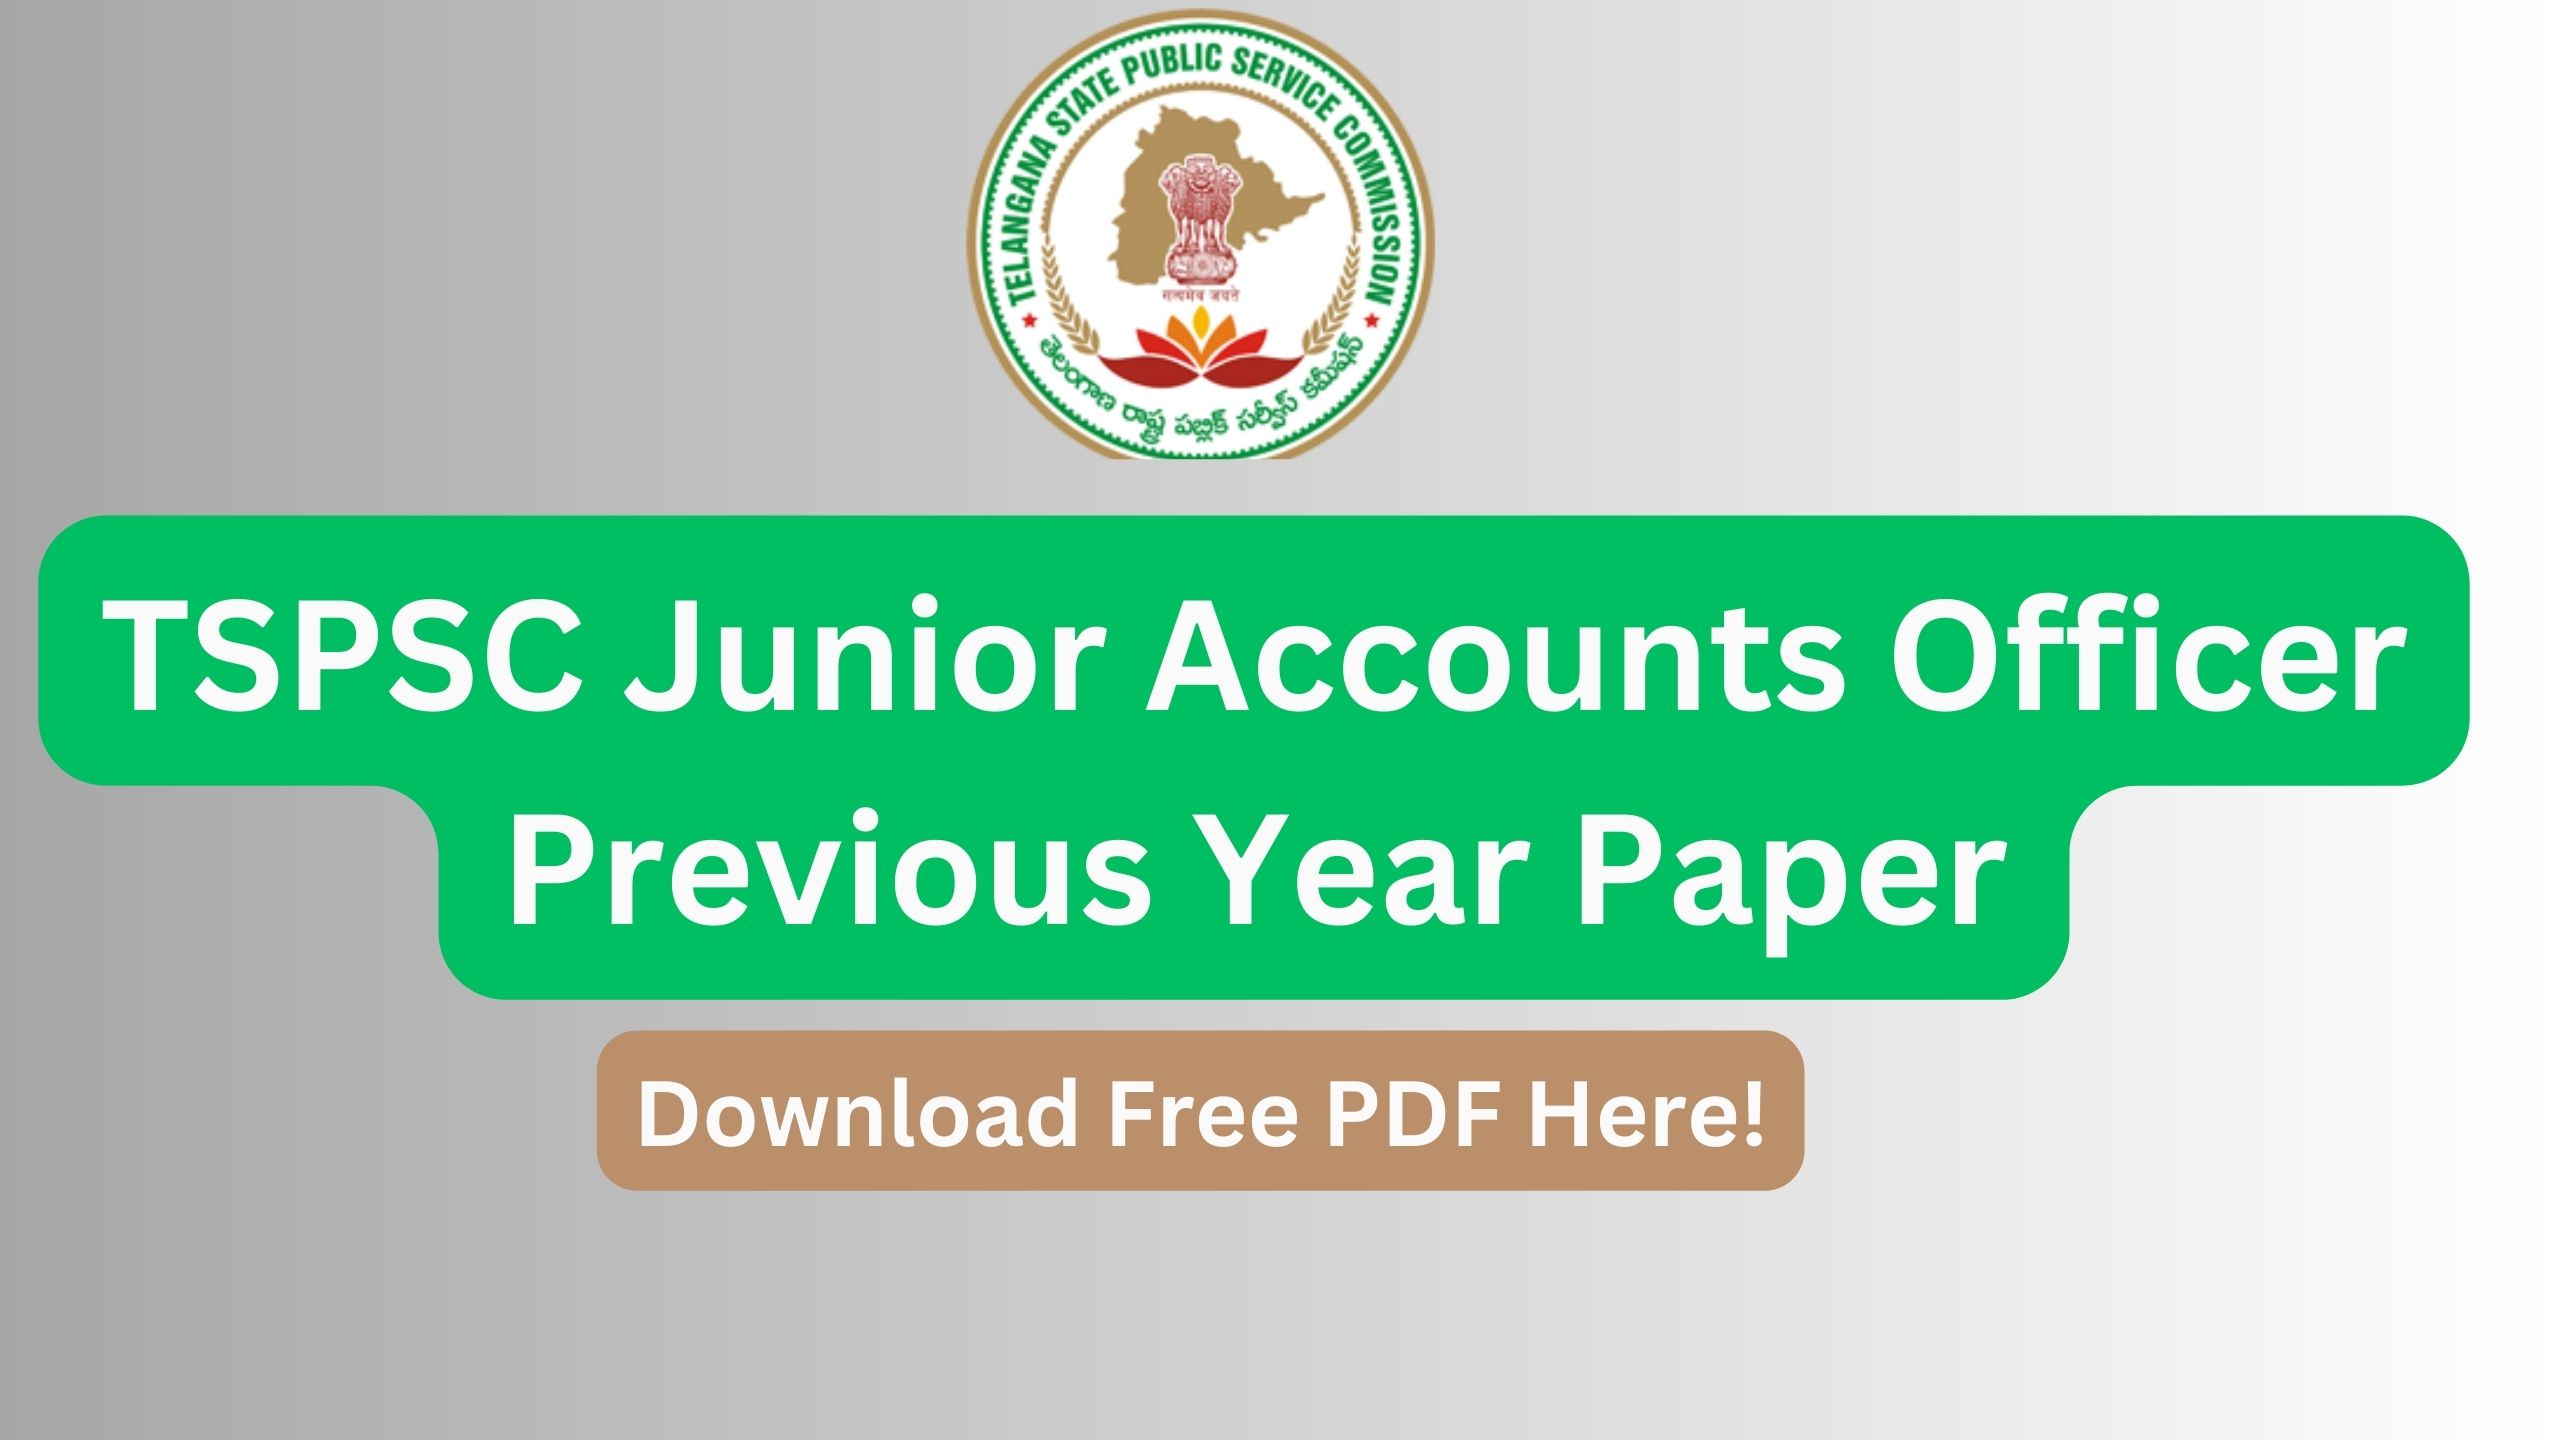 TSPSC Accounts Officer Previous Year Papers - Get Direct Link to Download Free PDF, Benefits of Checking Telangana Accounts Officer Previous Year Paper Here.